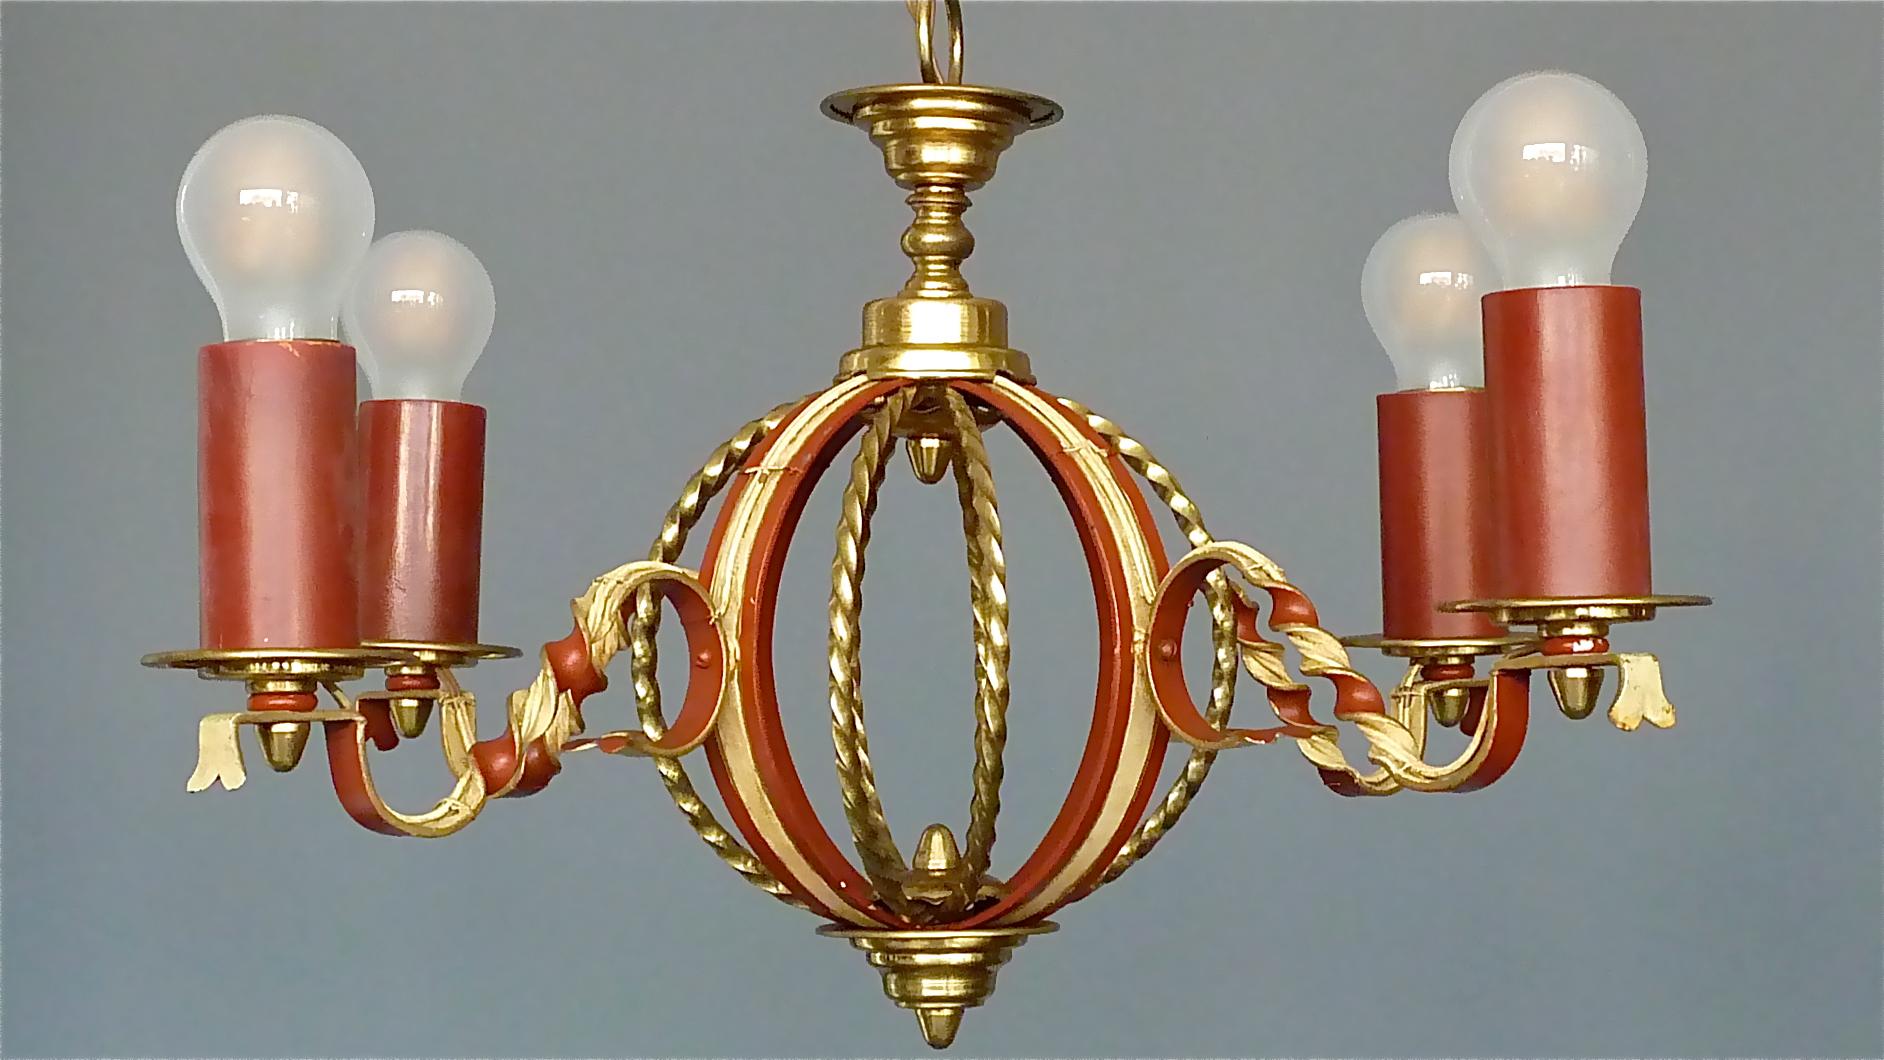 Mid-Century Modern Large French Poillerat Style Globe Chandelier Wrought Iron Brass 1950s no.1 of 2 For Sale